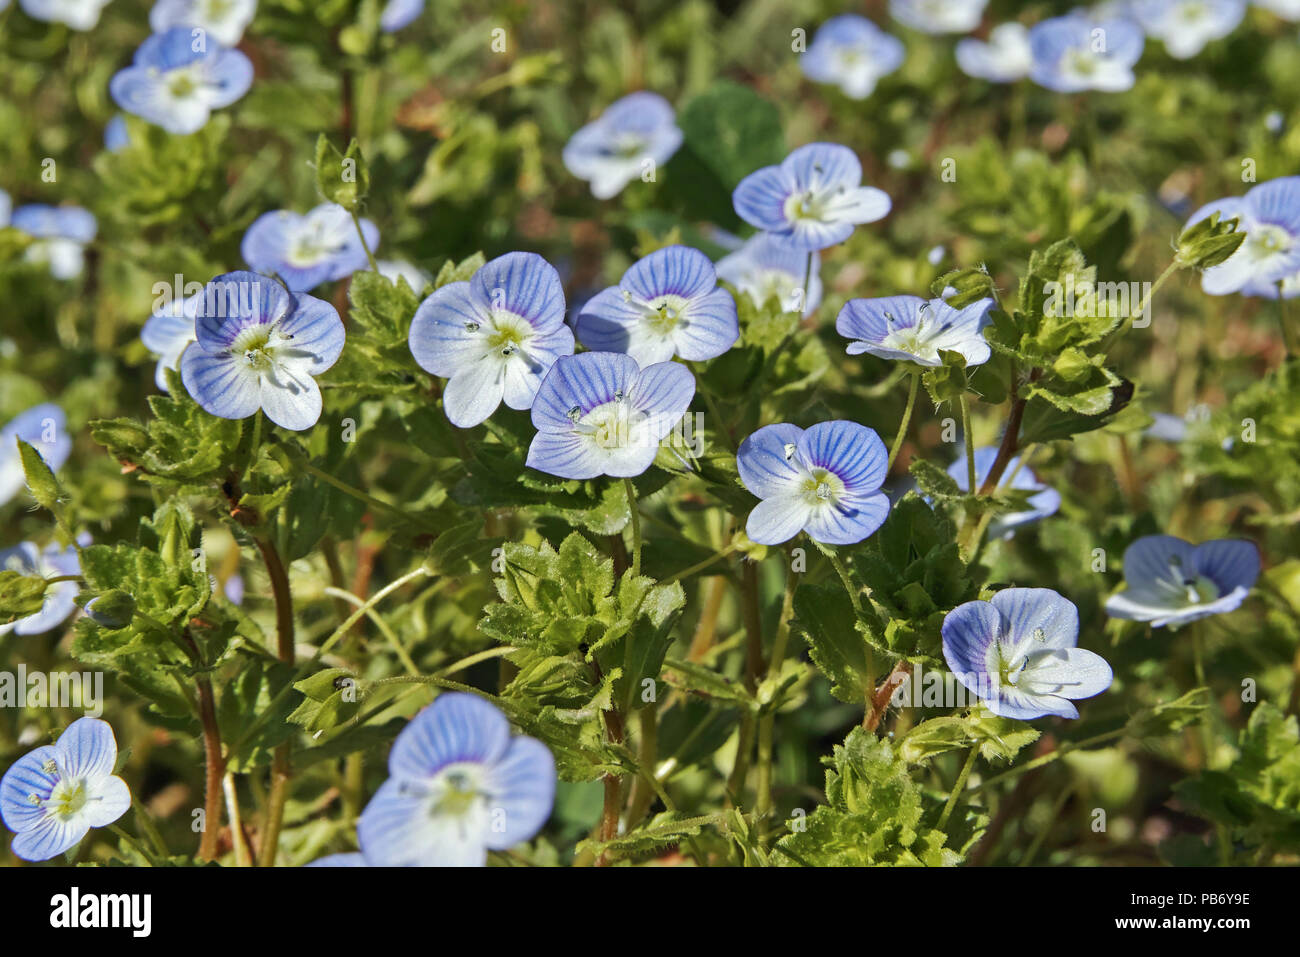 plants of germander speedwell, flowers and leaves Stock Photo